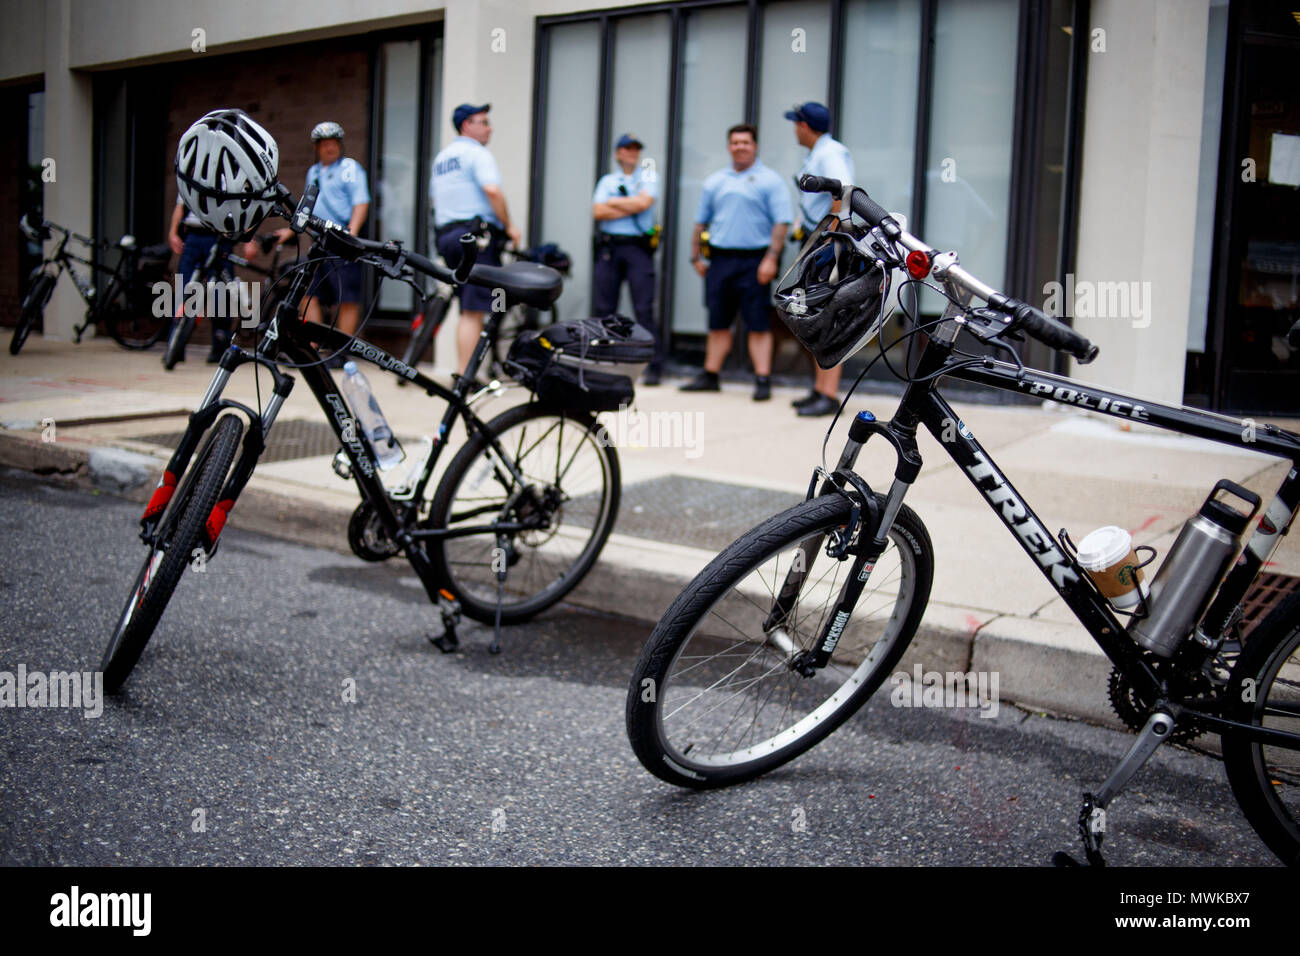 Philadelphia, United States. 01st June, 2018. Bicycle police stand by at a rally near the city's ICE (Immigration and Customs Enforcement) office, organized by the ACLU in opposition to new Trump administration policies which separate children entering the country from their parents or accompanying family members. Credit: Michael Candelori/Pacific Press/Alamy Live News Stock Photo